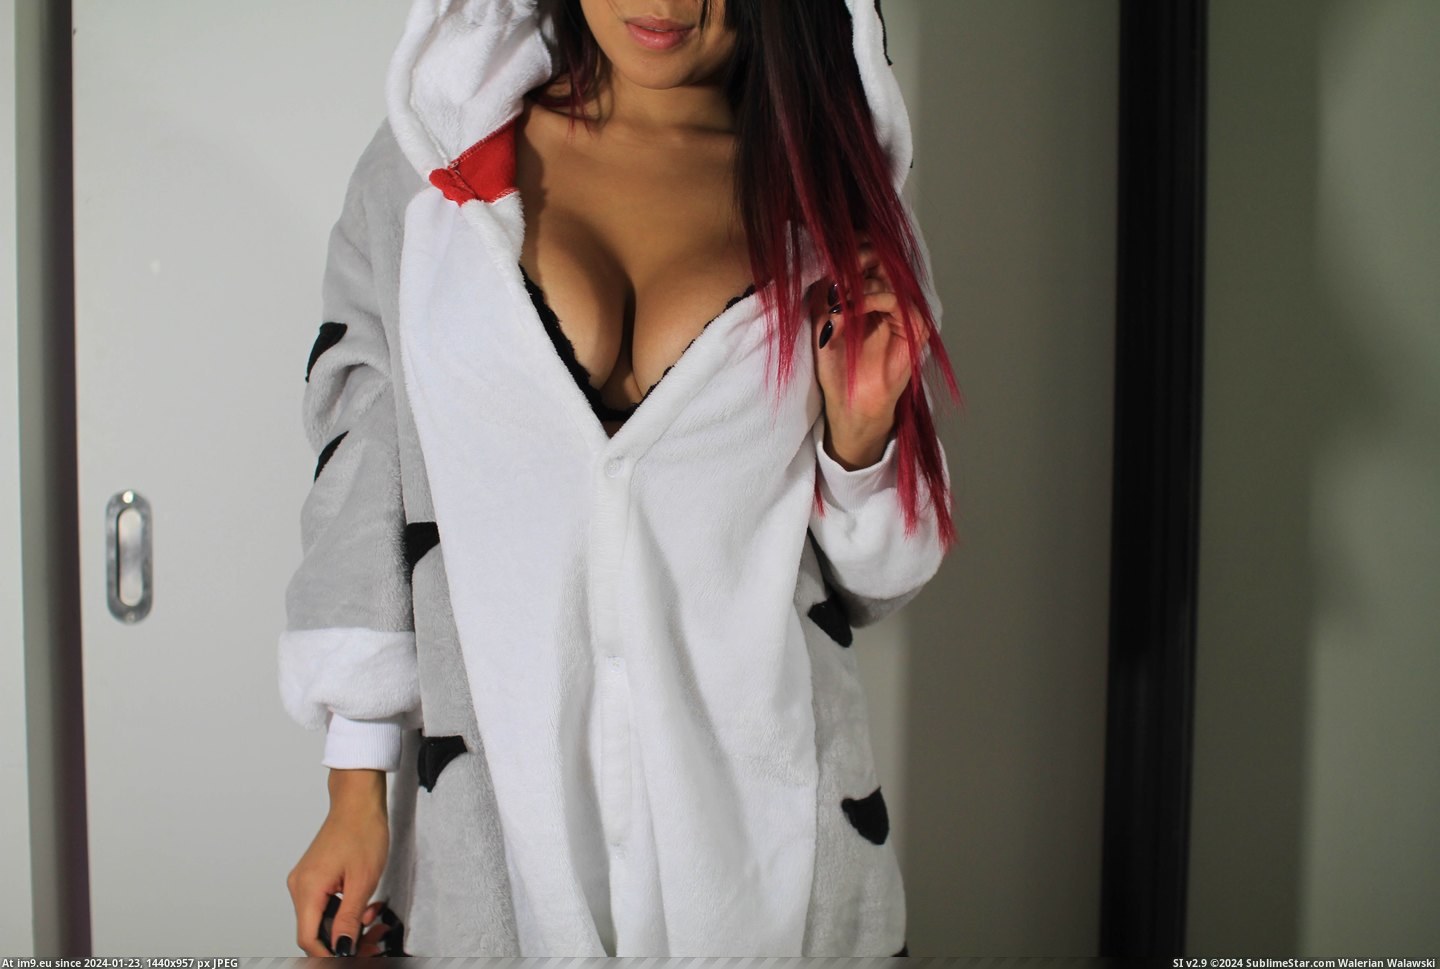 #Sexy #Was #How #Told #Onesie #Cat #Way [Gonewild] I was told there was no way I could make my cat onesie sexy, how'd I do GW? [f] 4 Pic. (Image of album My r/GONEWILD favs))